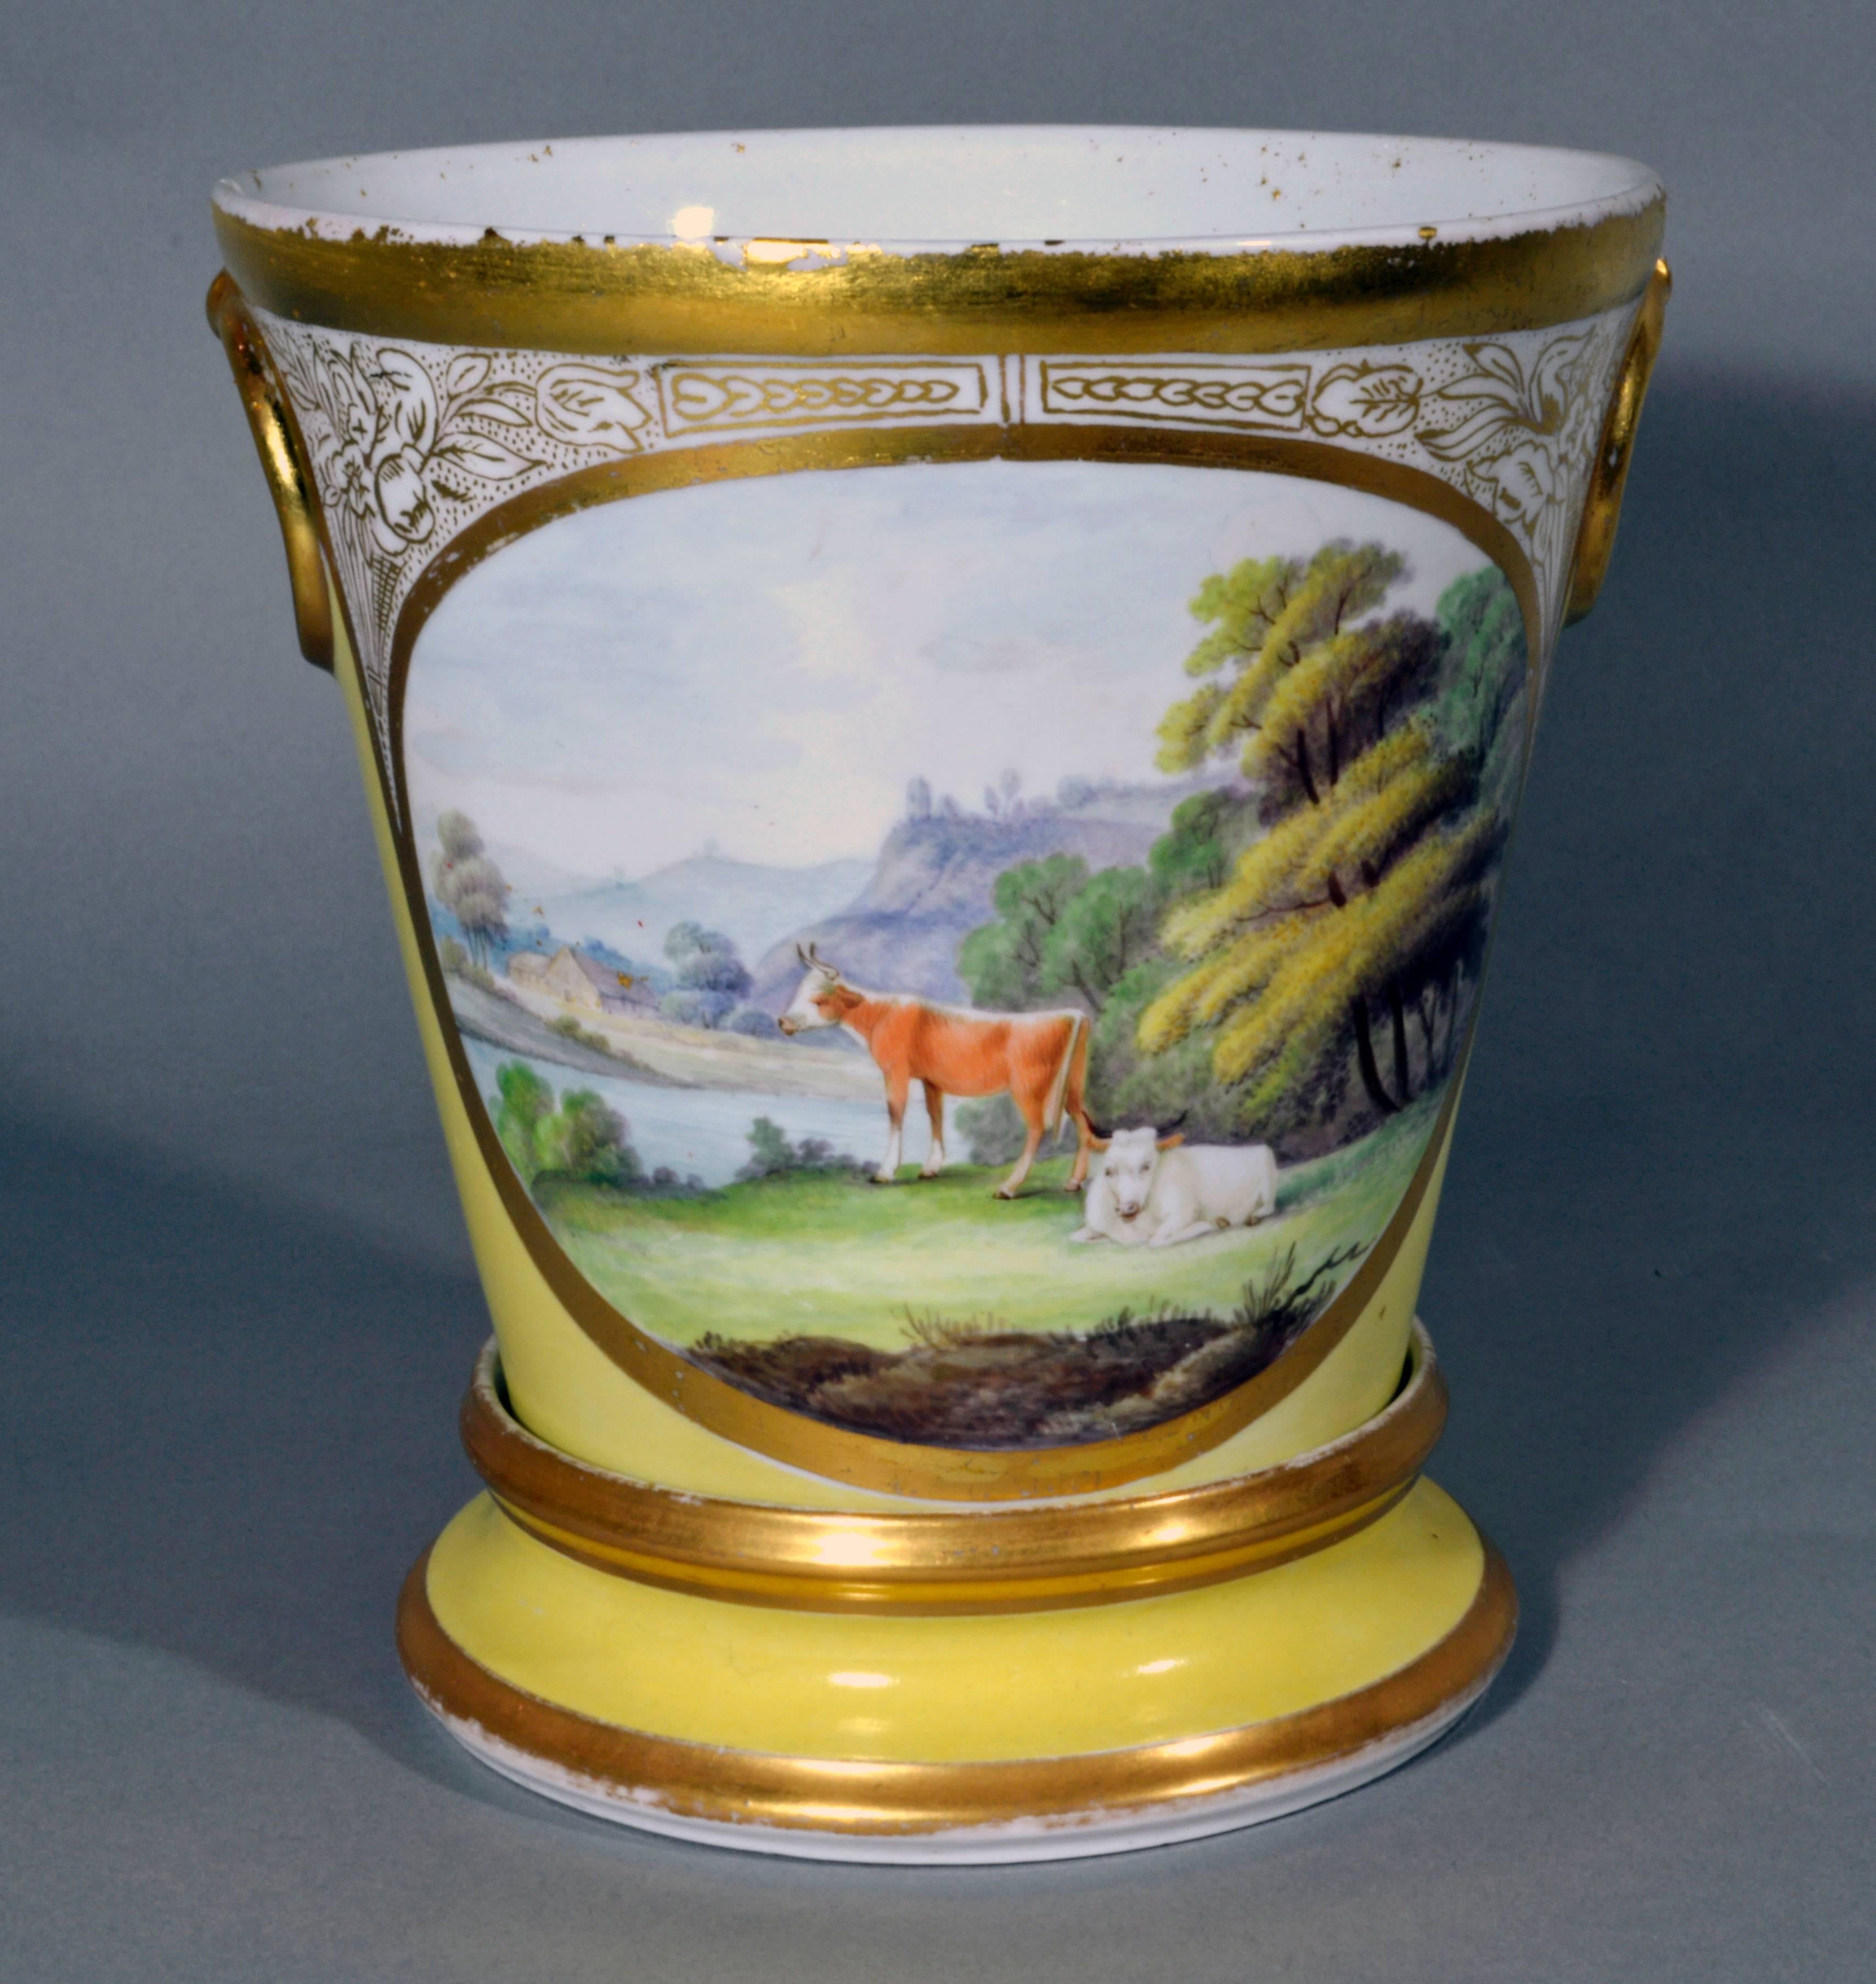 Regency Coalport Porcelain Yellow Cache Pots and Stands with Pastoral Scenes of Cows